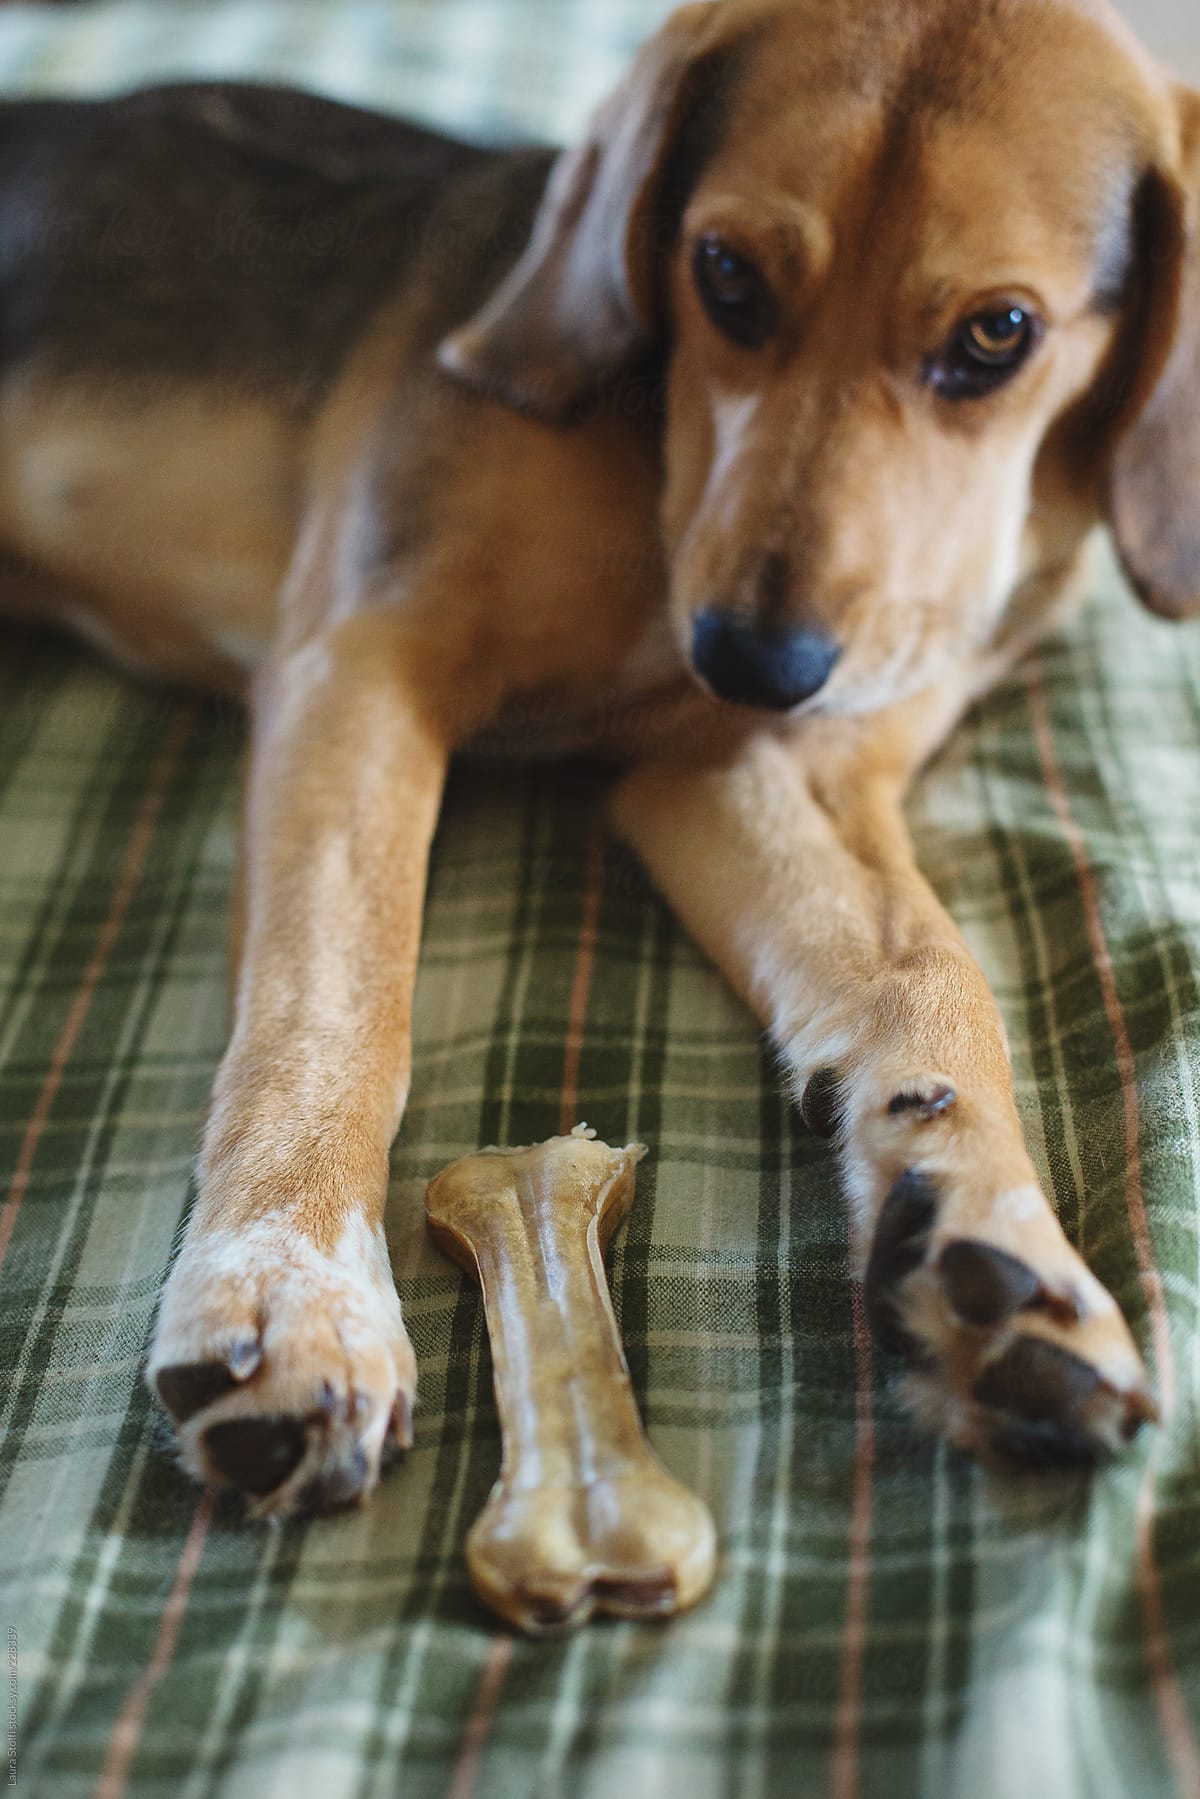 Cute puppy laying with a bone between her legs